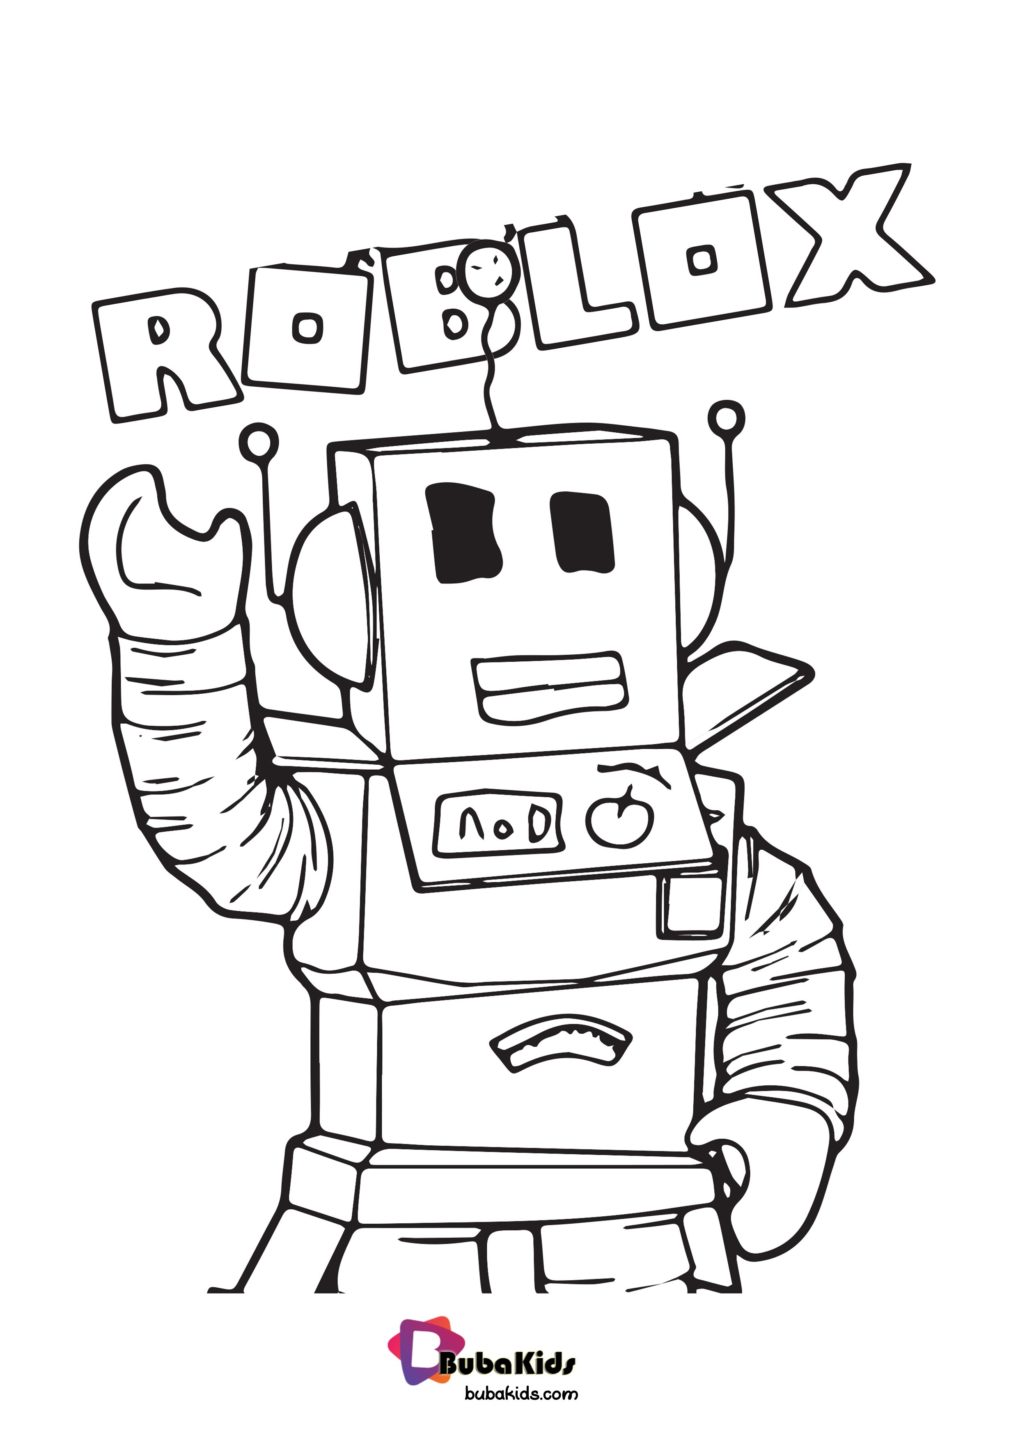 roblox coloring page